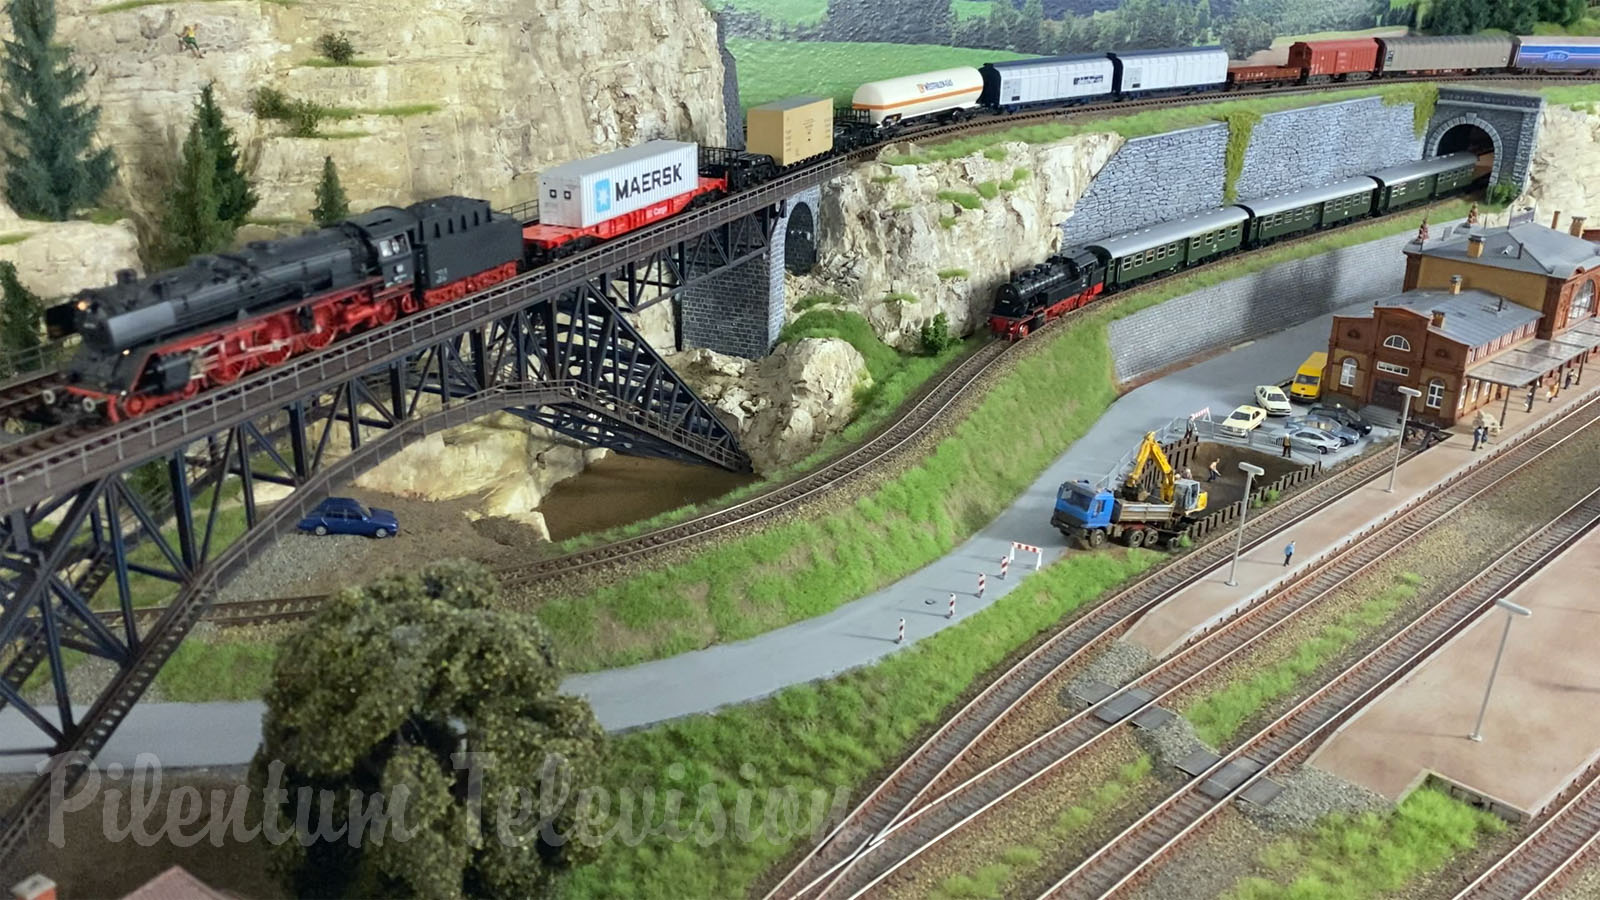 Model Trains and Faller Cars - Enjoy Steam Locos and Diesel Locomotives - HO Scale Layout